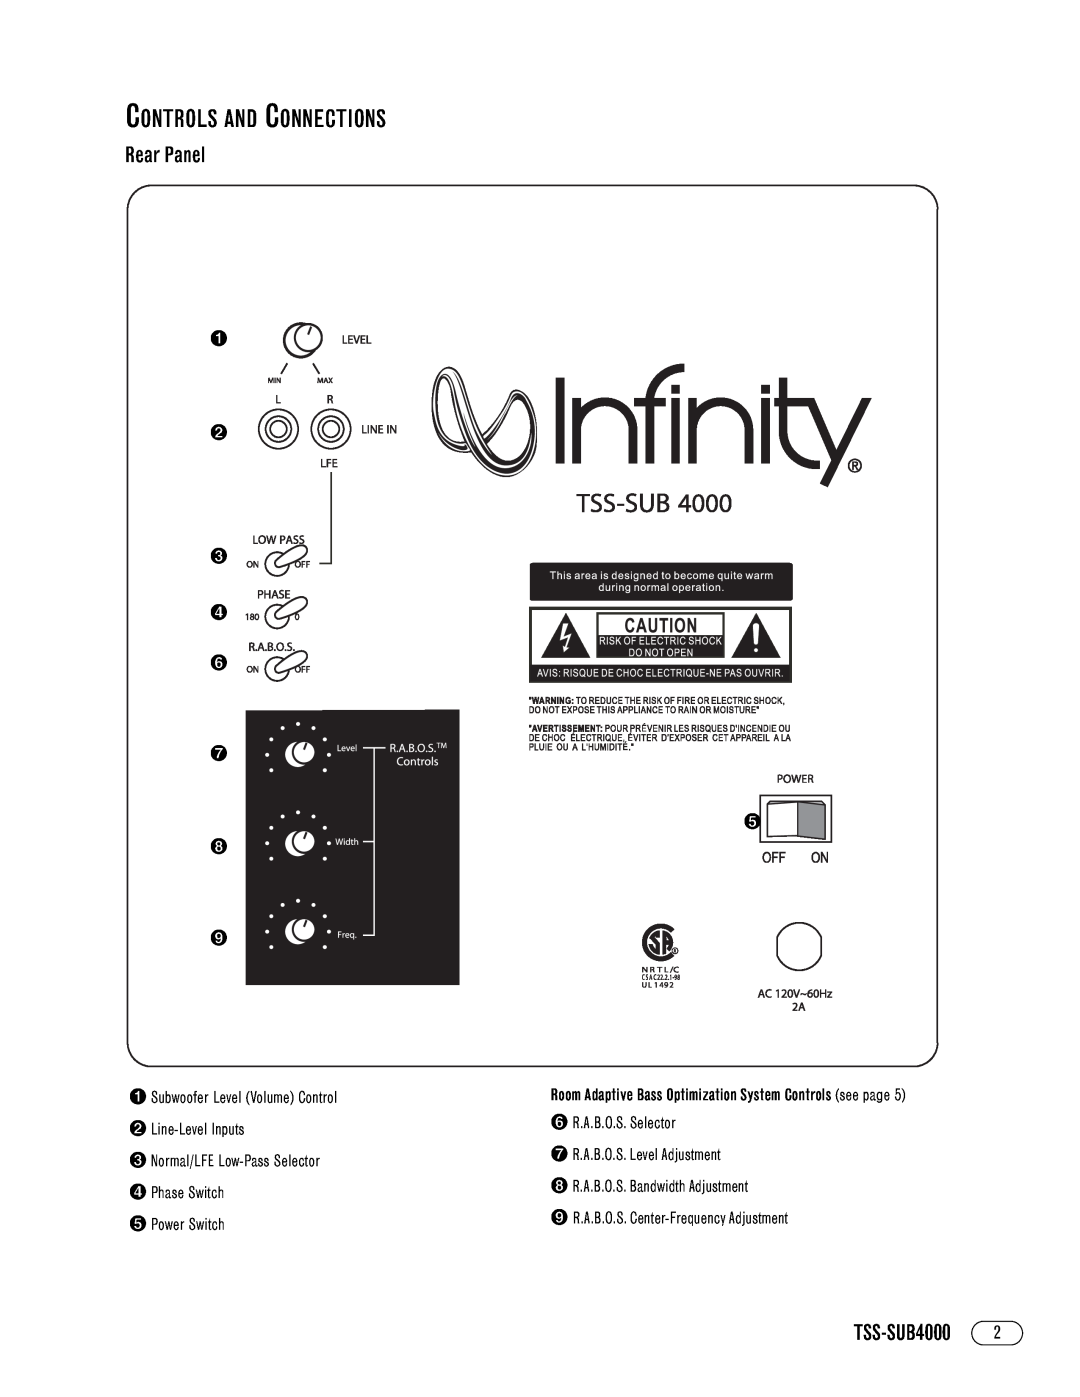 Infinity TSS-SUB4000 manual Controls And Connections, Rear Panel, £ ¢ § ¶ ª 